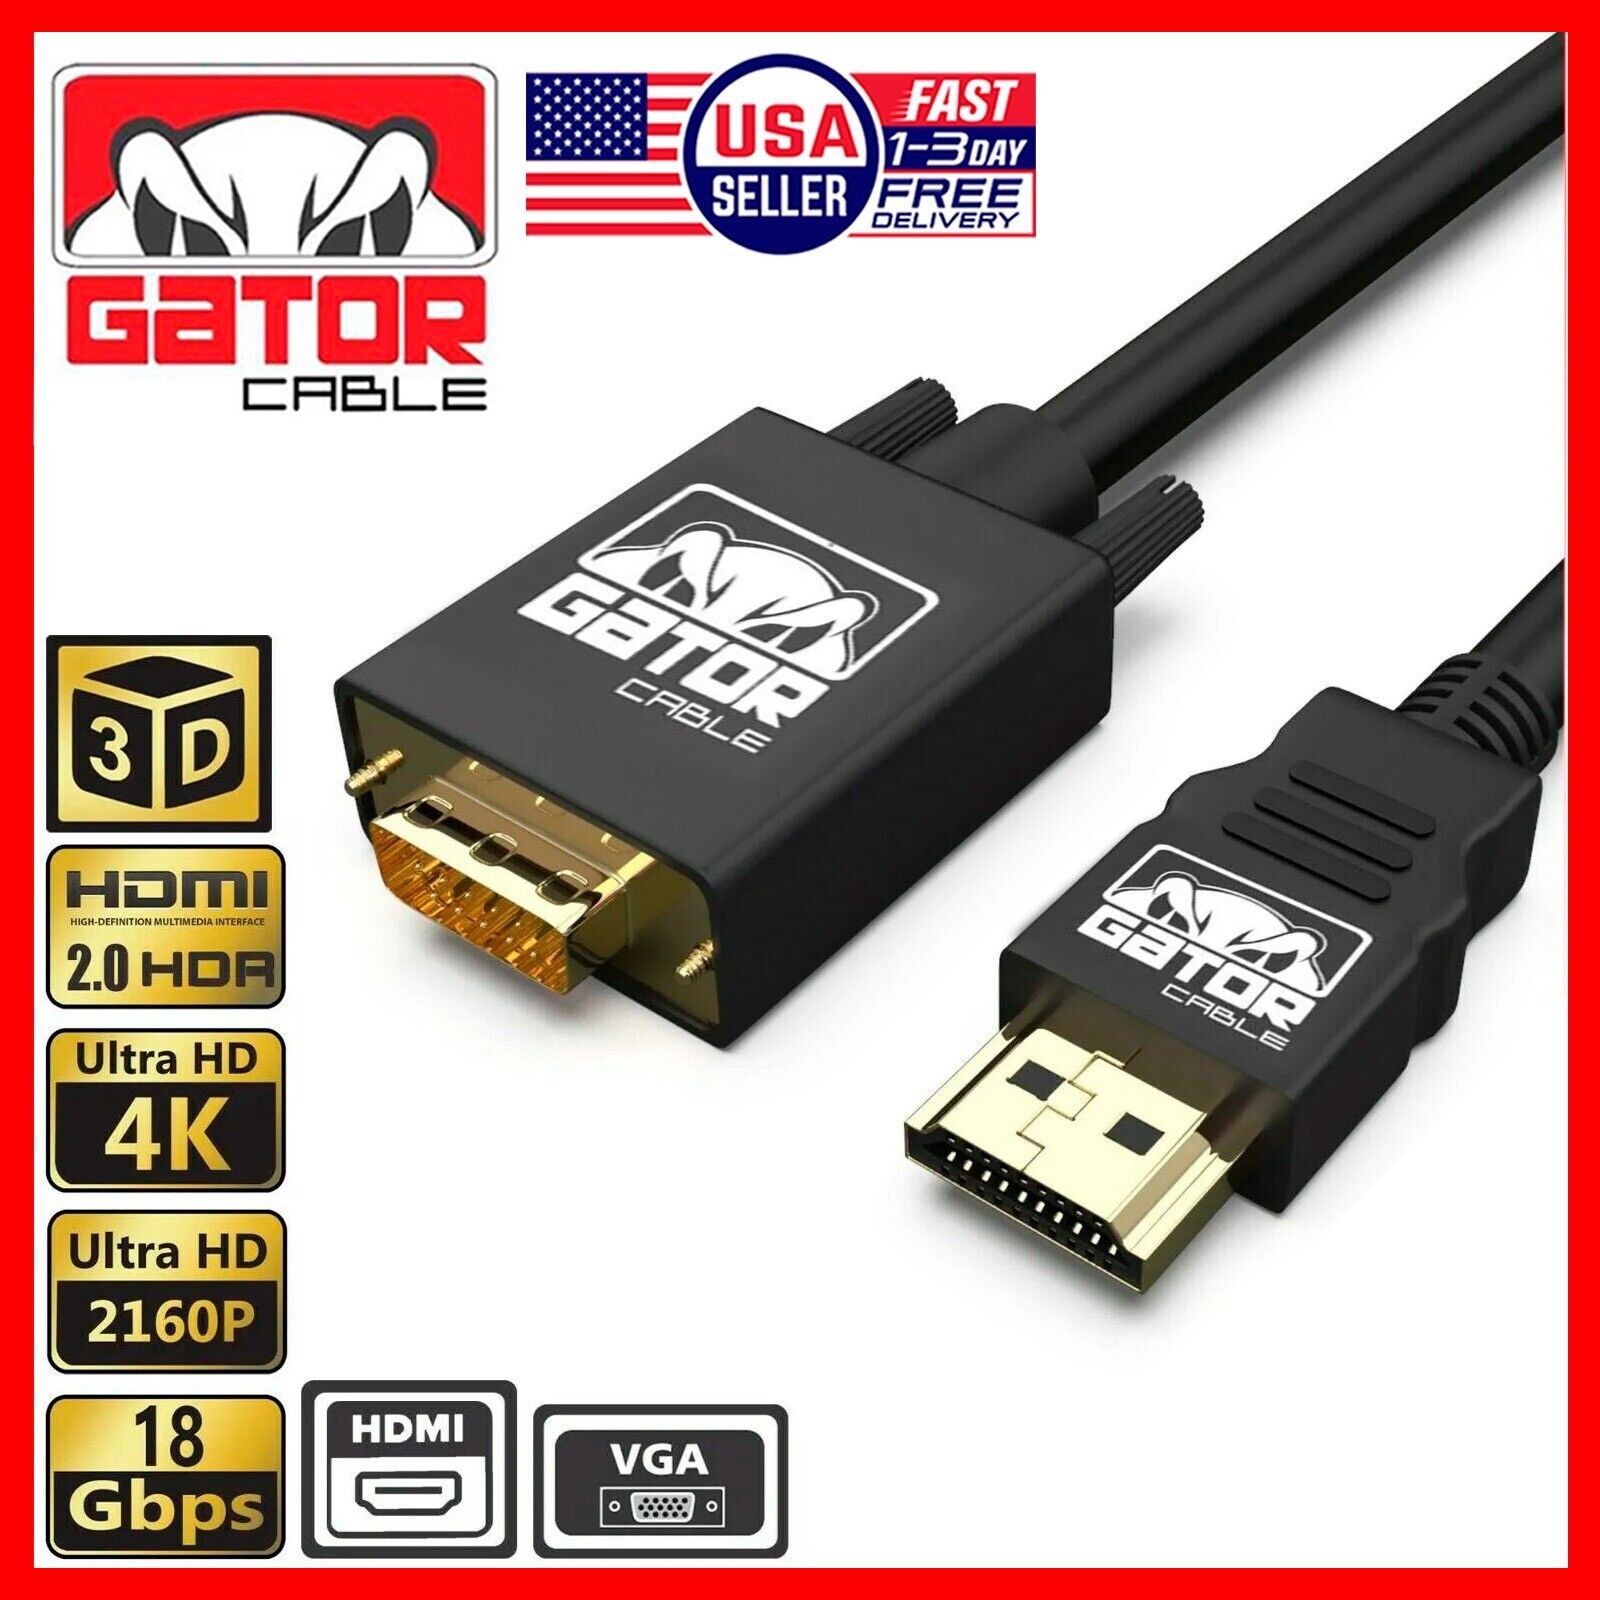 HDMI to VGA Cable Converter Adapter For HDTV PC Desktop Monitor Video 1080P 6FT